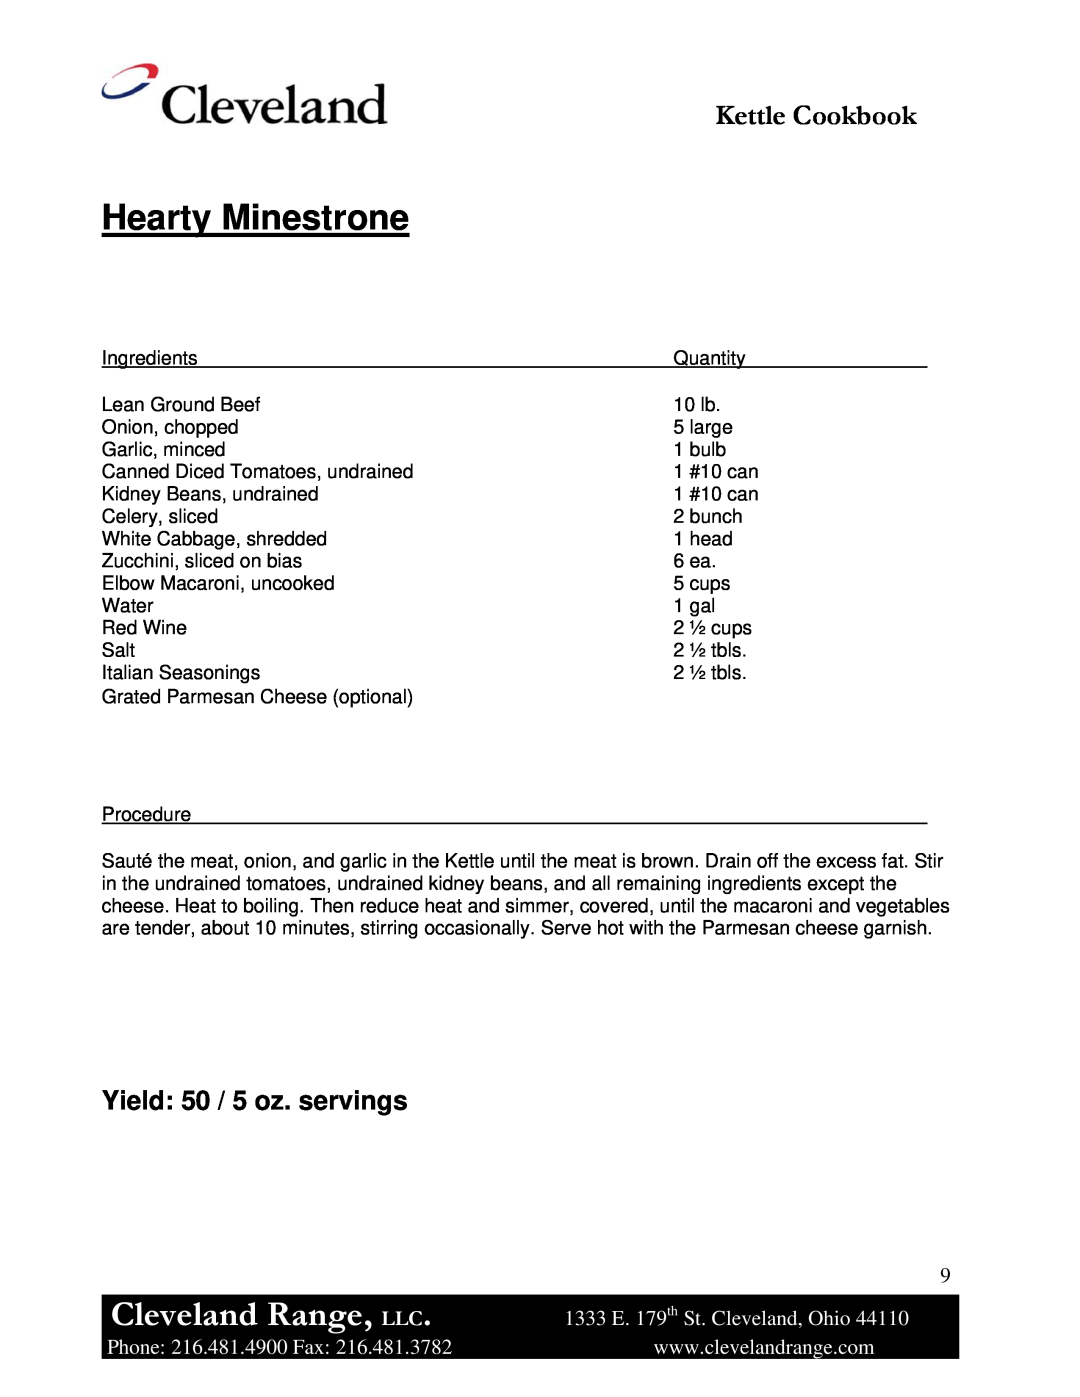 Cleveland Range Steam Jacketed Kettle Hearty Minestrone, Cleveland Range, LLC, Kettle Cookbook, Yield 50 / 5 oz. servings 